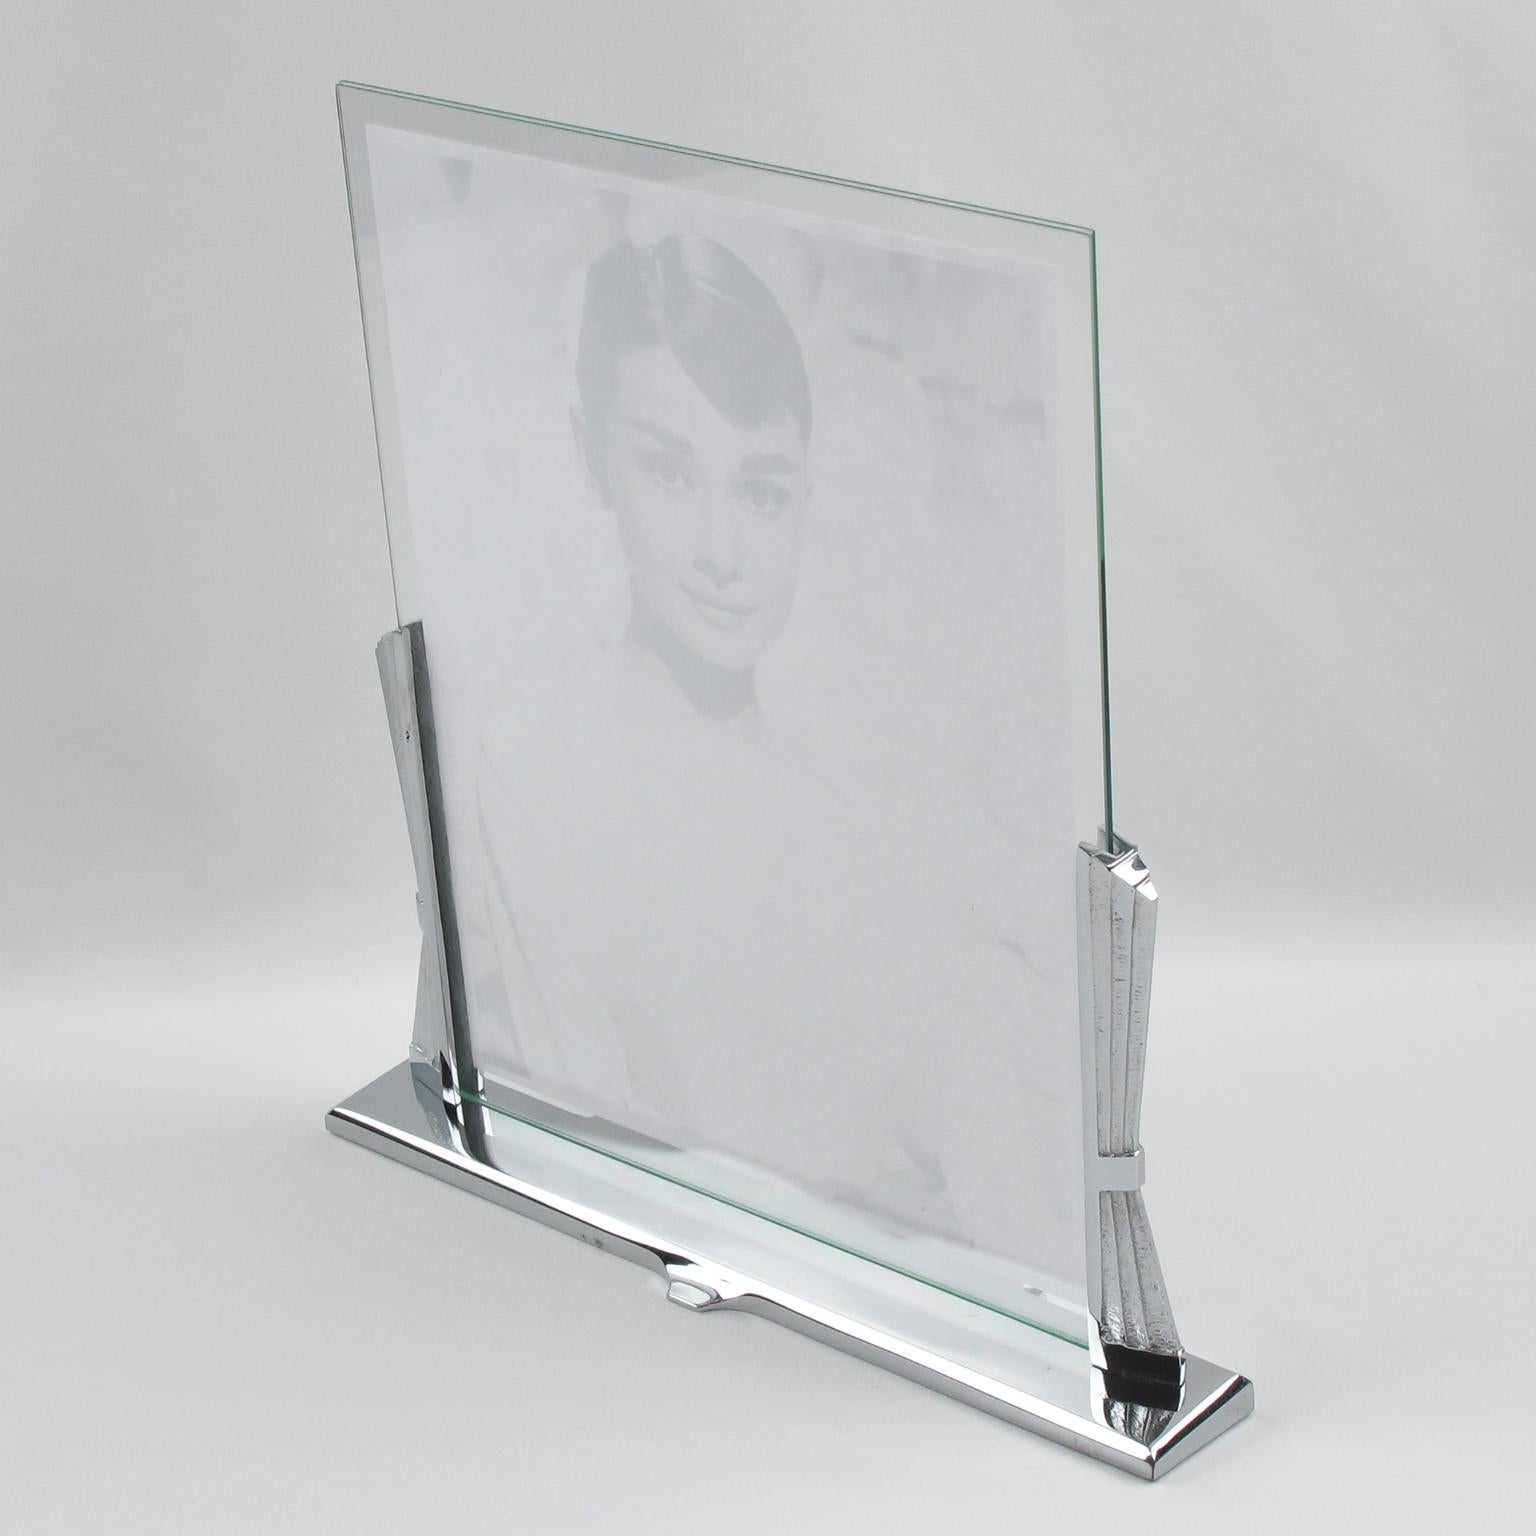 Art Deco Modernist Chrome Picture Frame, France 1930s In Excellent Condition For Sale In Atlanta, GA